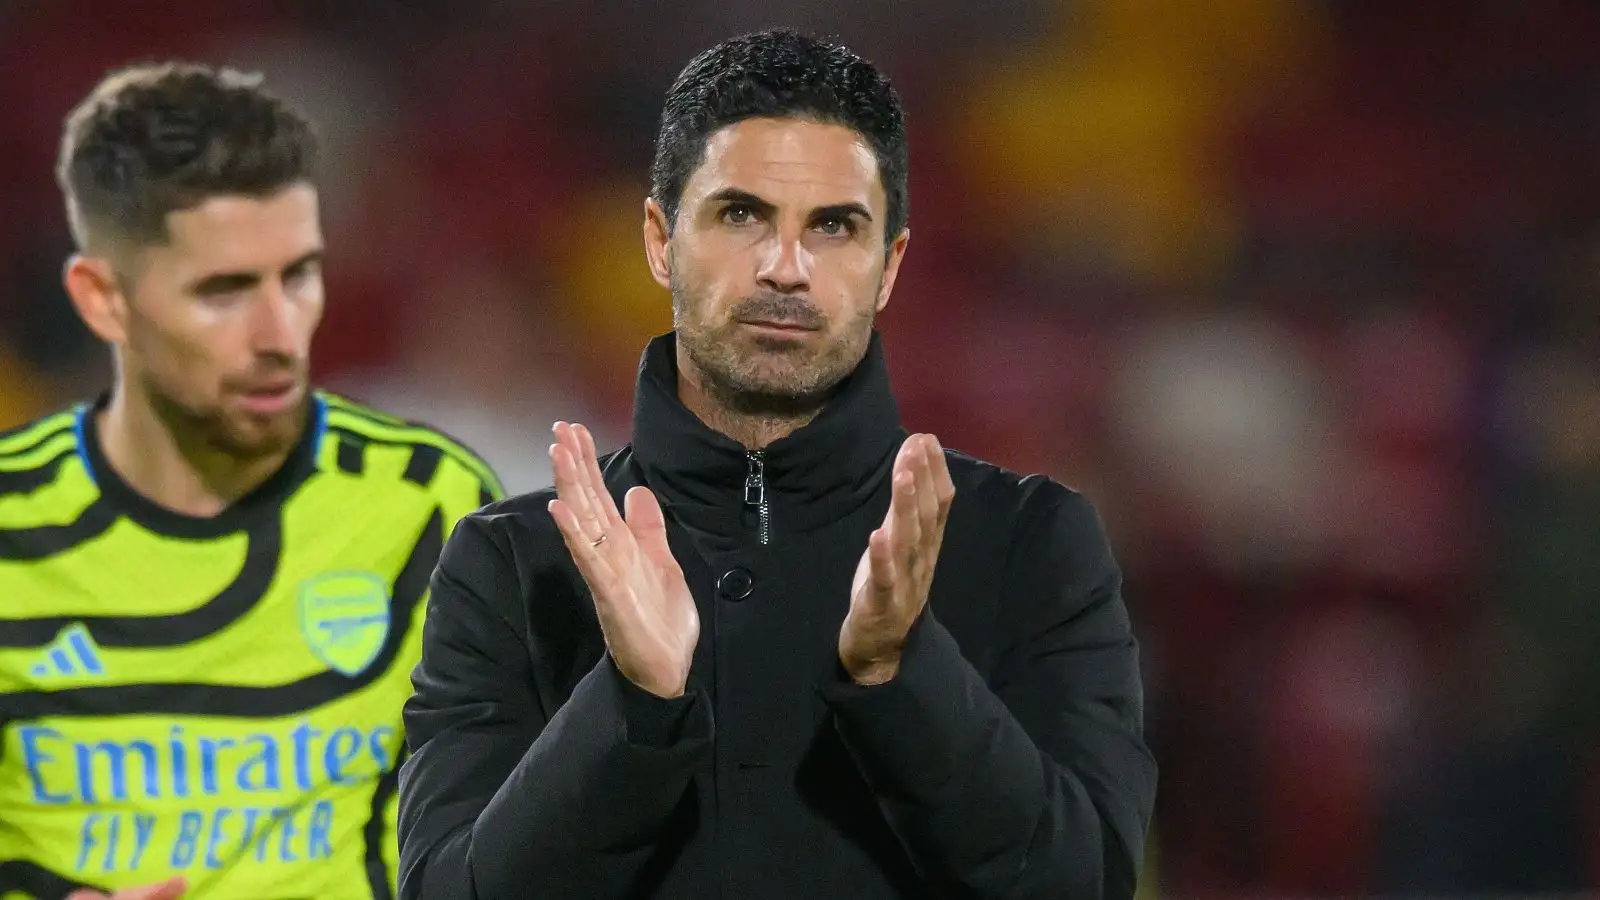 'He needs to be given some rest' - Ex-Arsenal defender slams Arteta for overplaying Gunners star